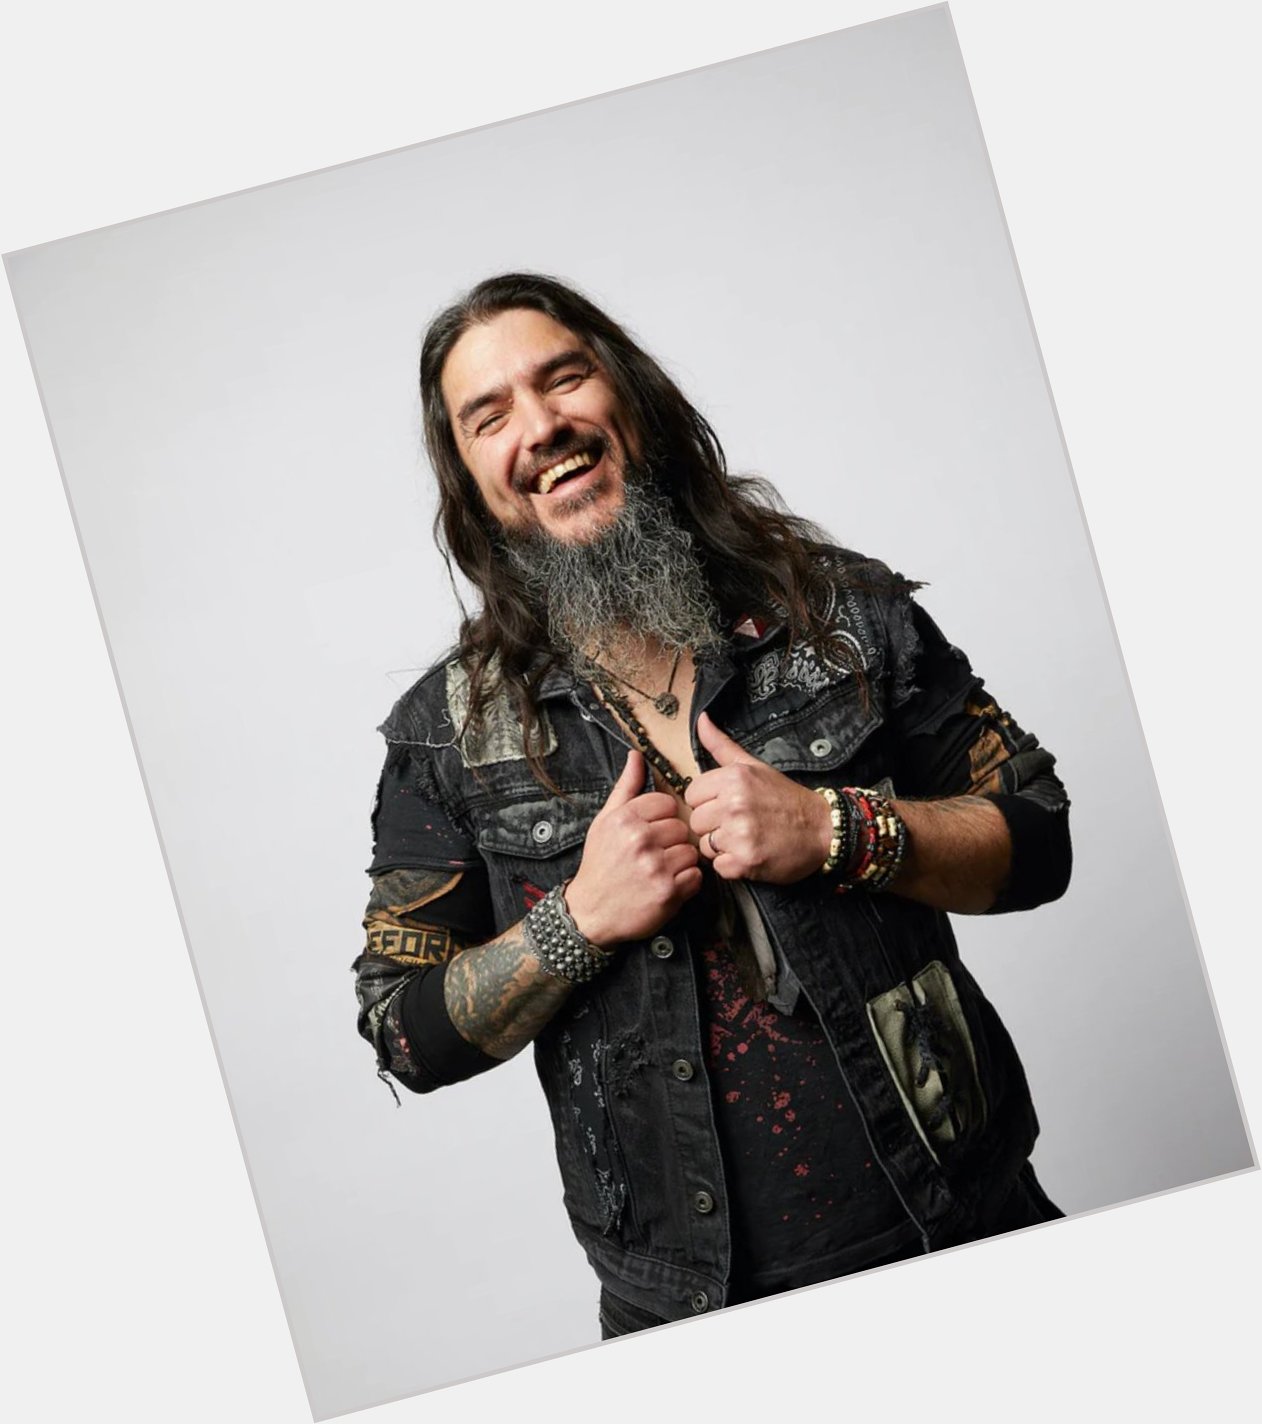  Happy birthday, Robb Flynn!

What\s the best time you\ve seen Machine Head live? 